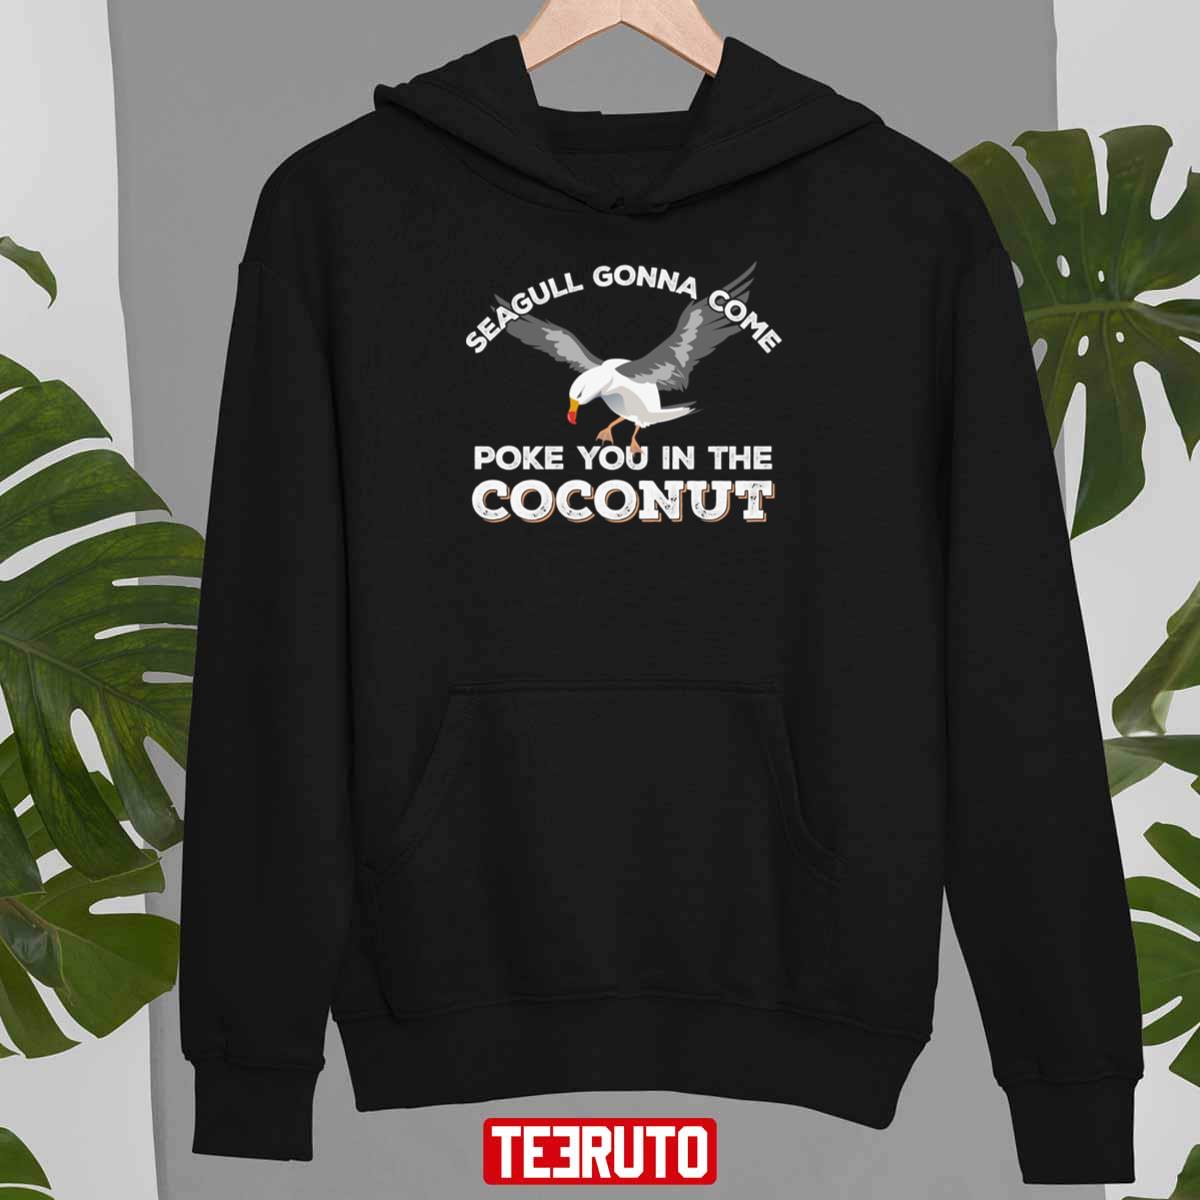 Seagulls Stop It Now Poke You In The Coconut Unisex T-Shirt